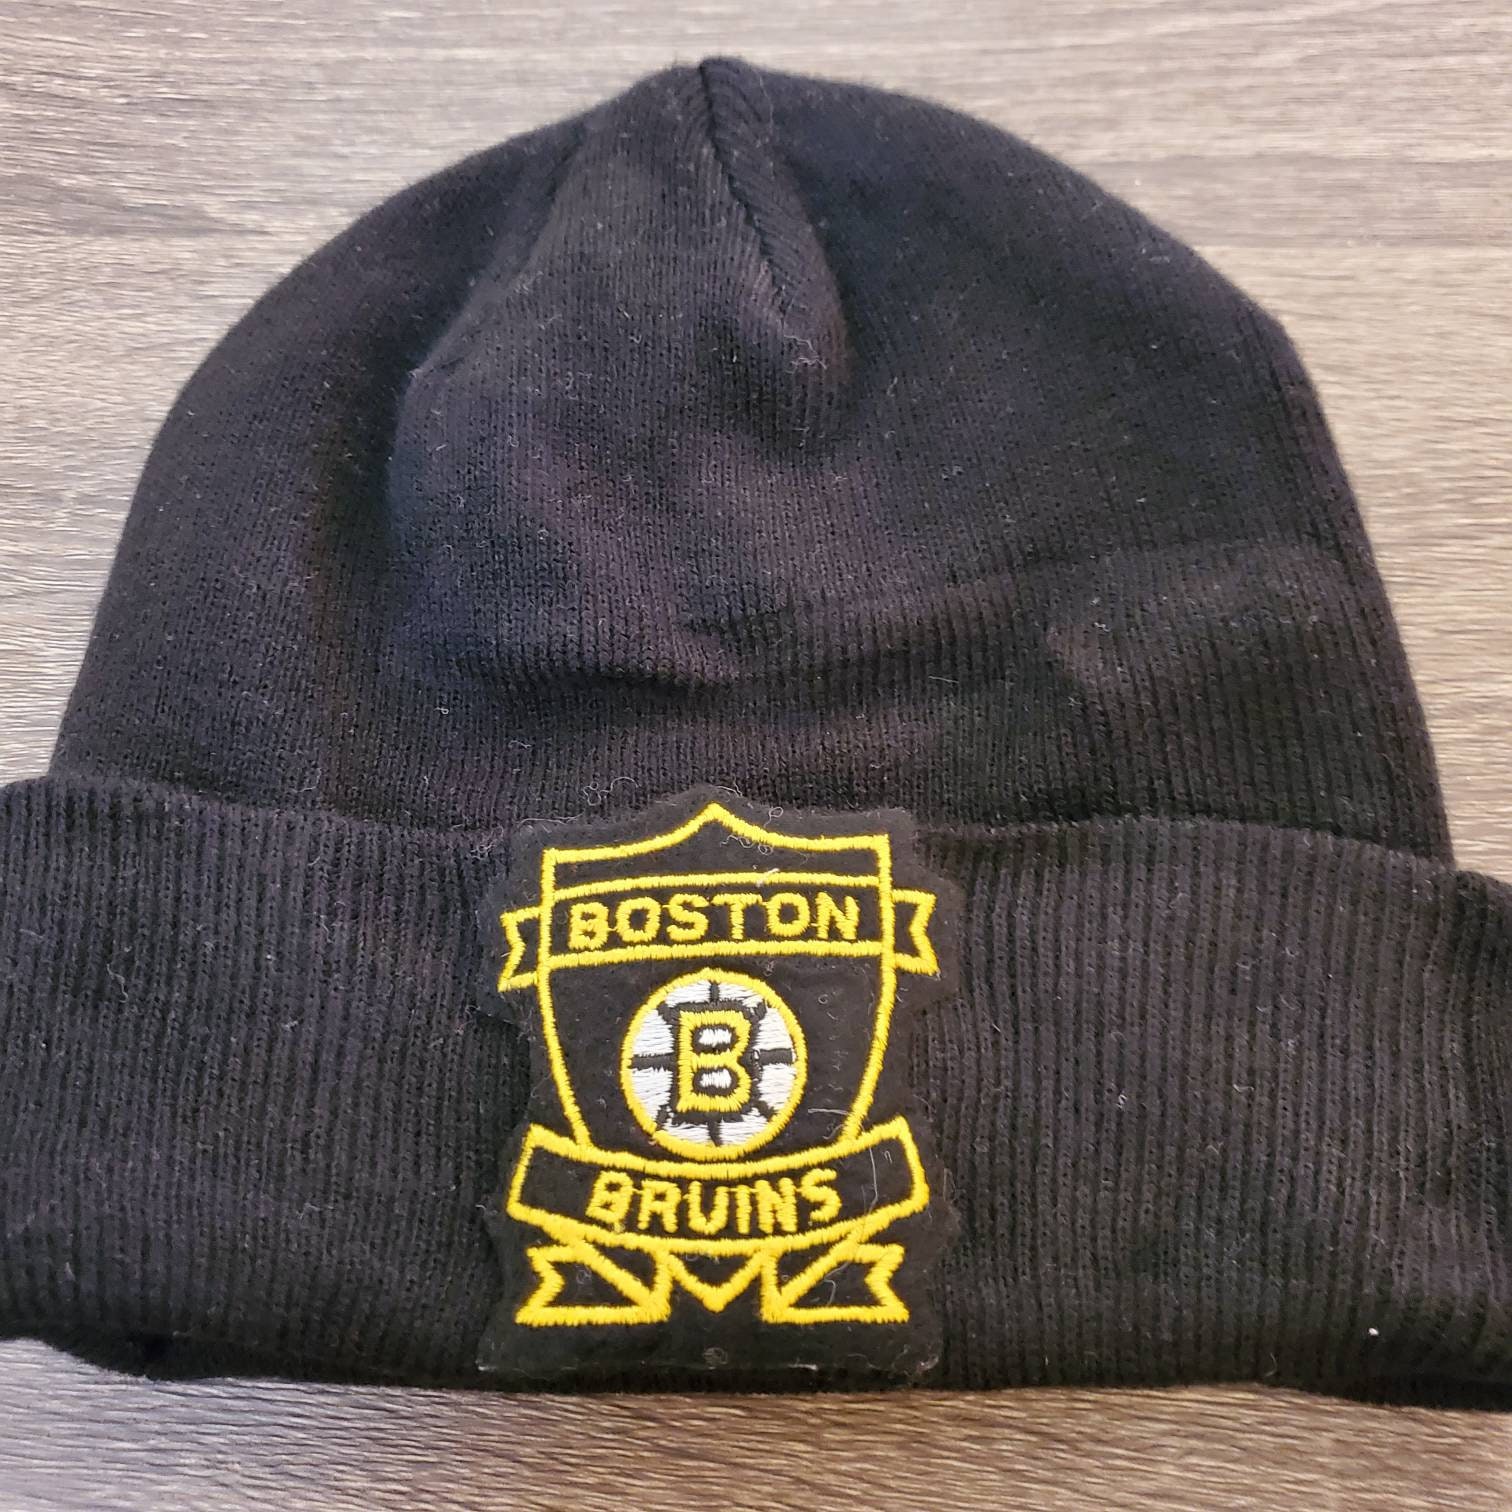 Winter Classic hat came in… : r/BostonBruins